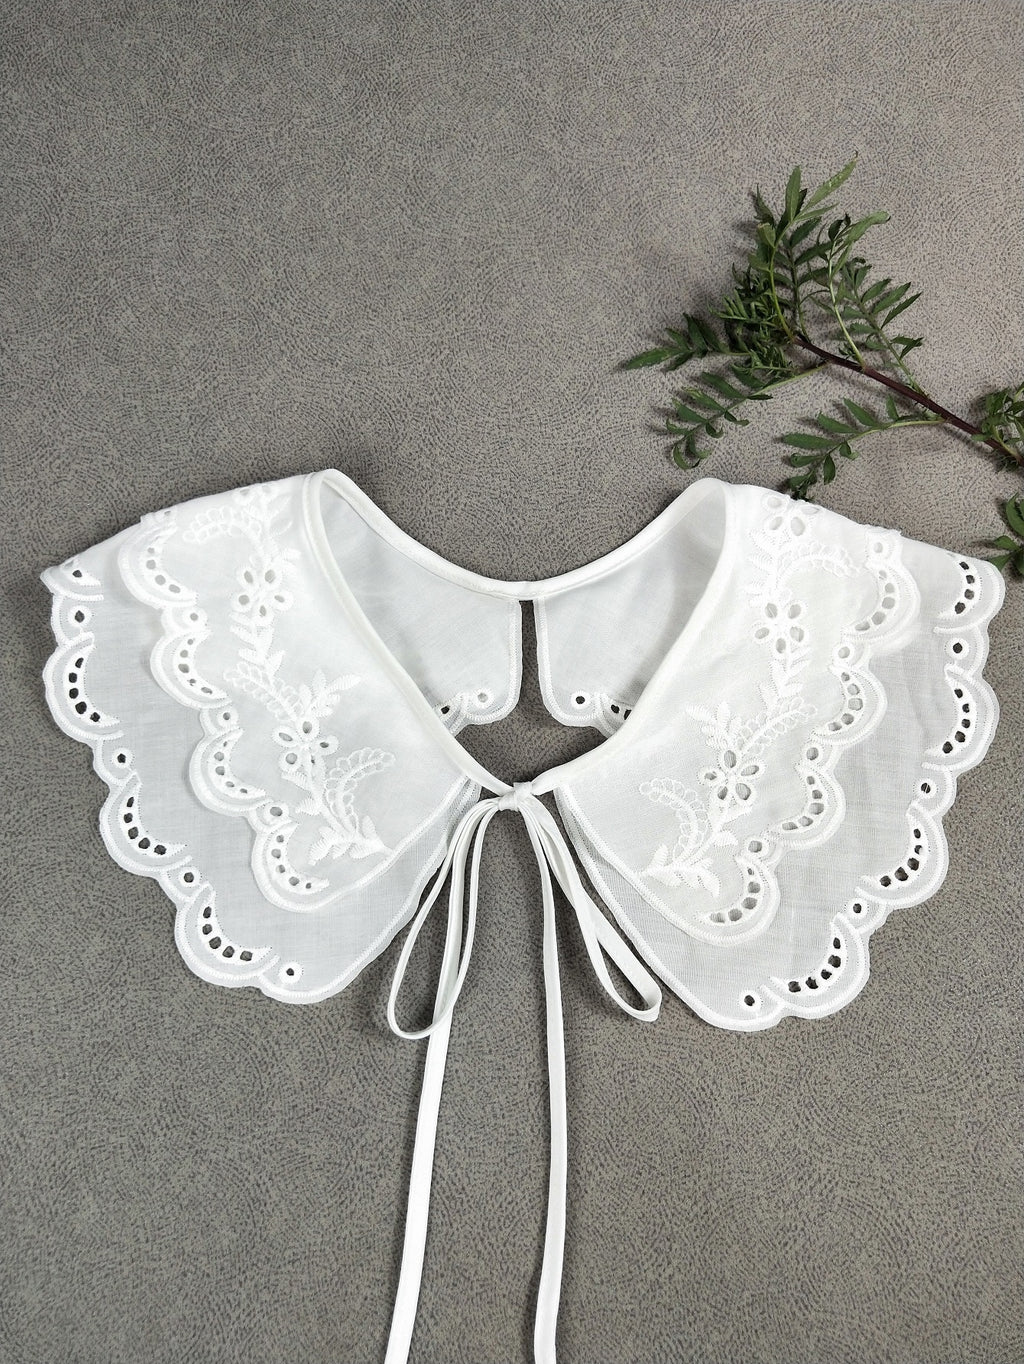 1pc White Women's Double-layer Embroidery Hollow Out Delicate Detachable Shoulder-fitting Fake Collar For Sweater, Sweatshirt Collar Accessory, Autumn